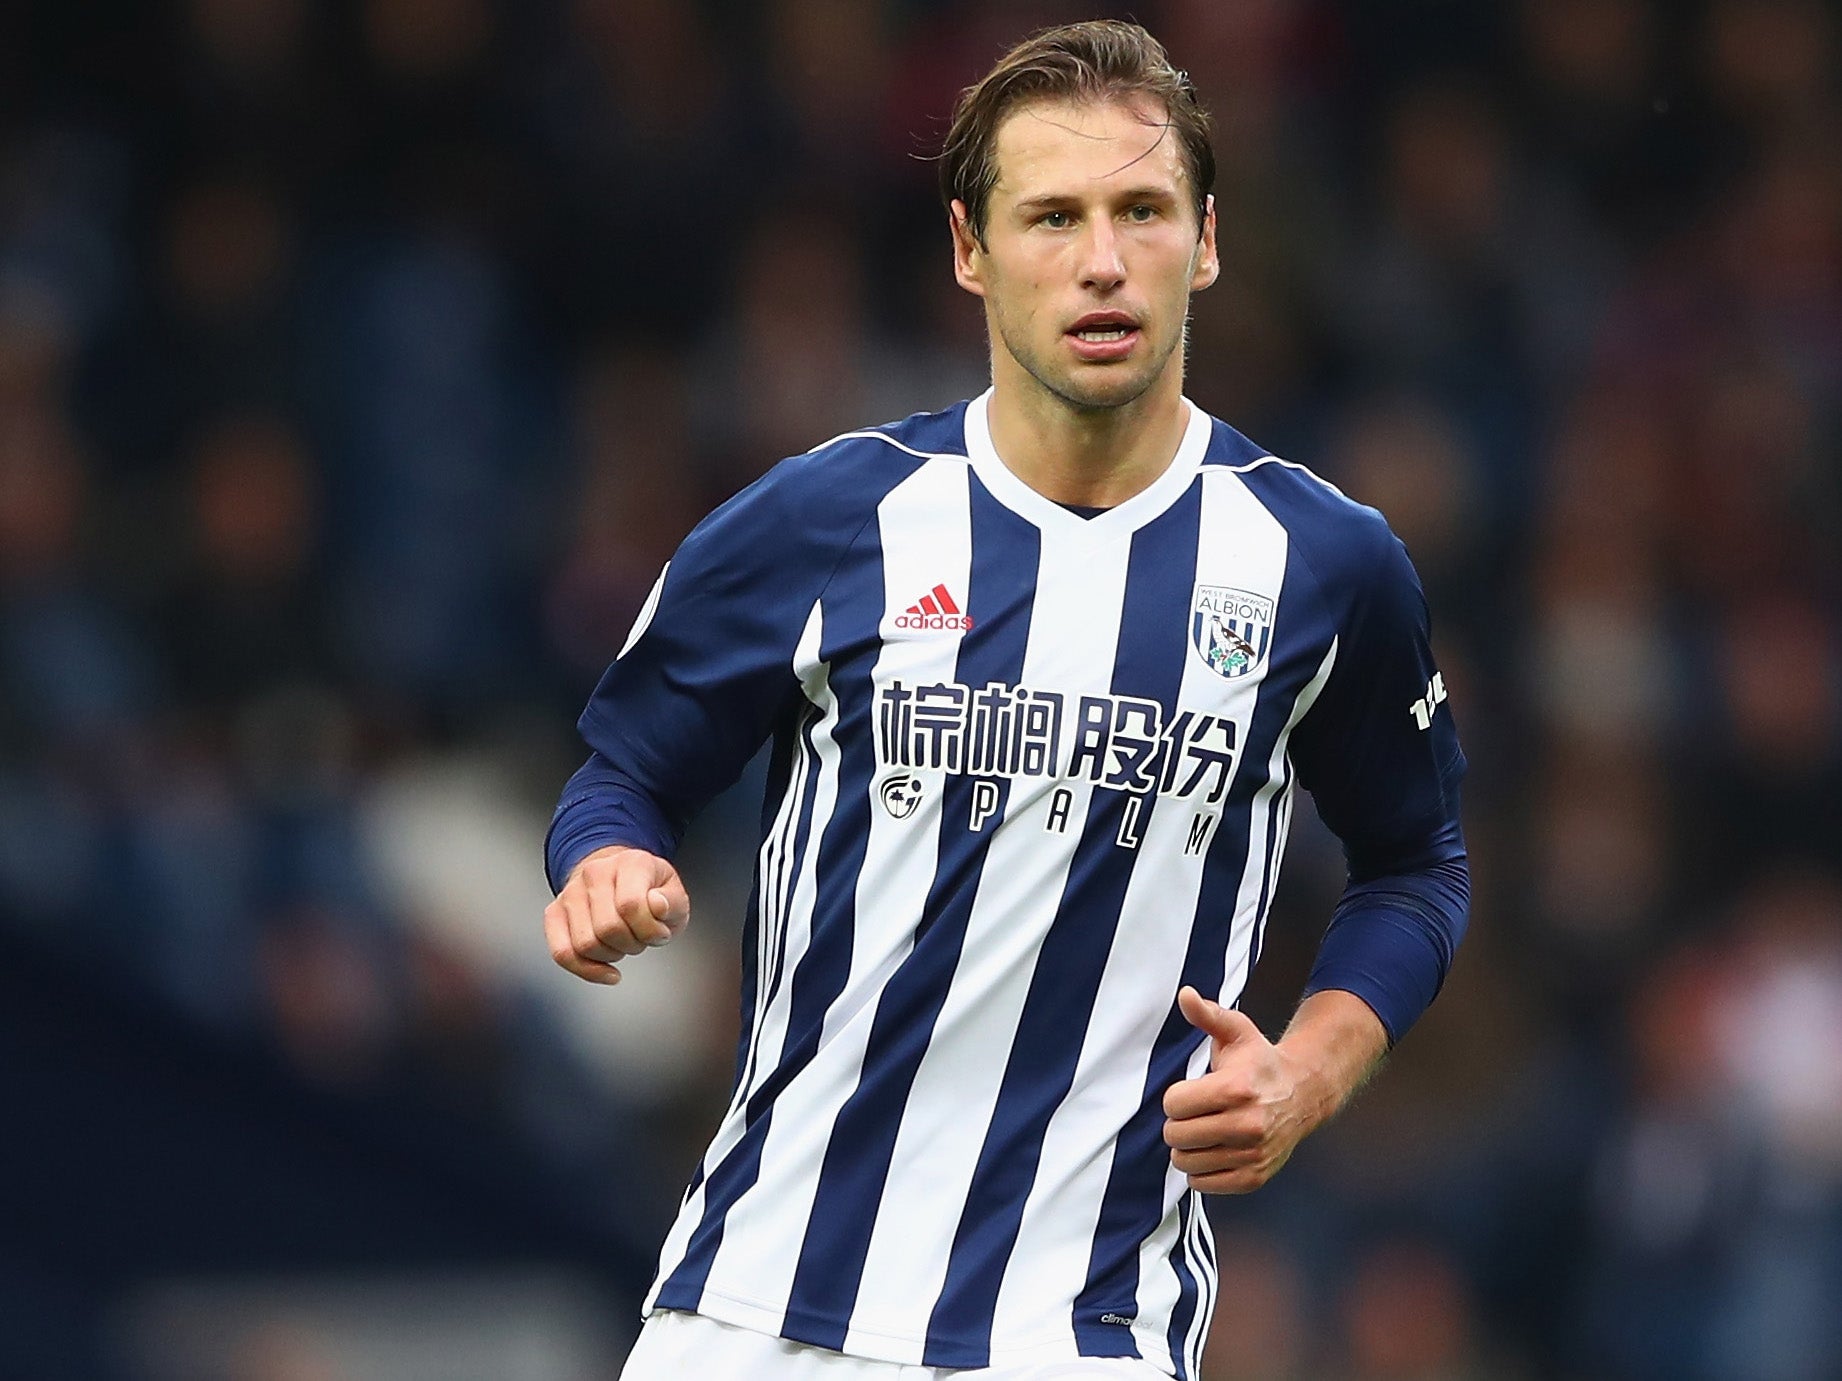 Krychowiak is on loan at the Hawthorns until the end of the season